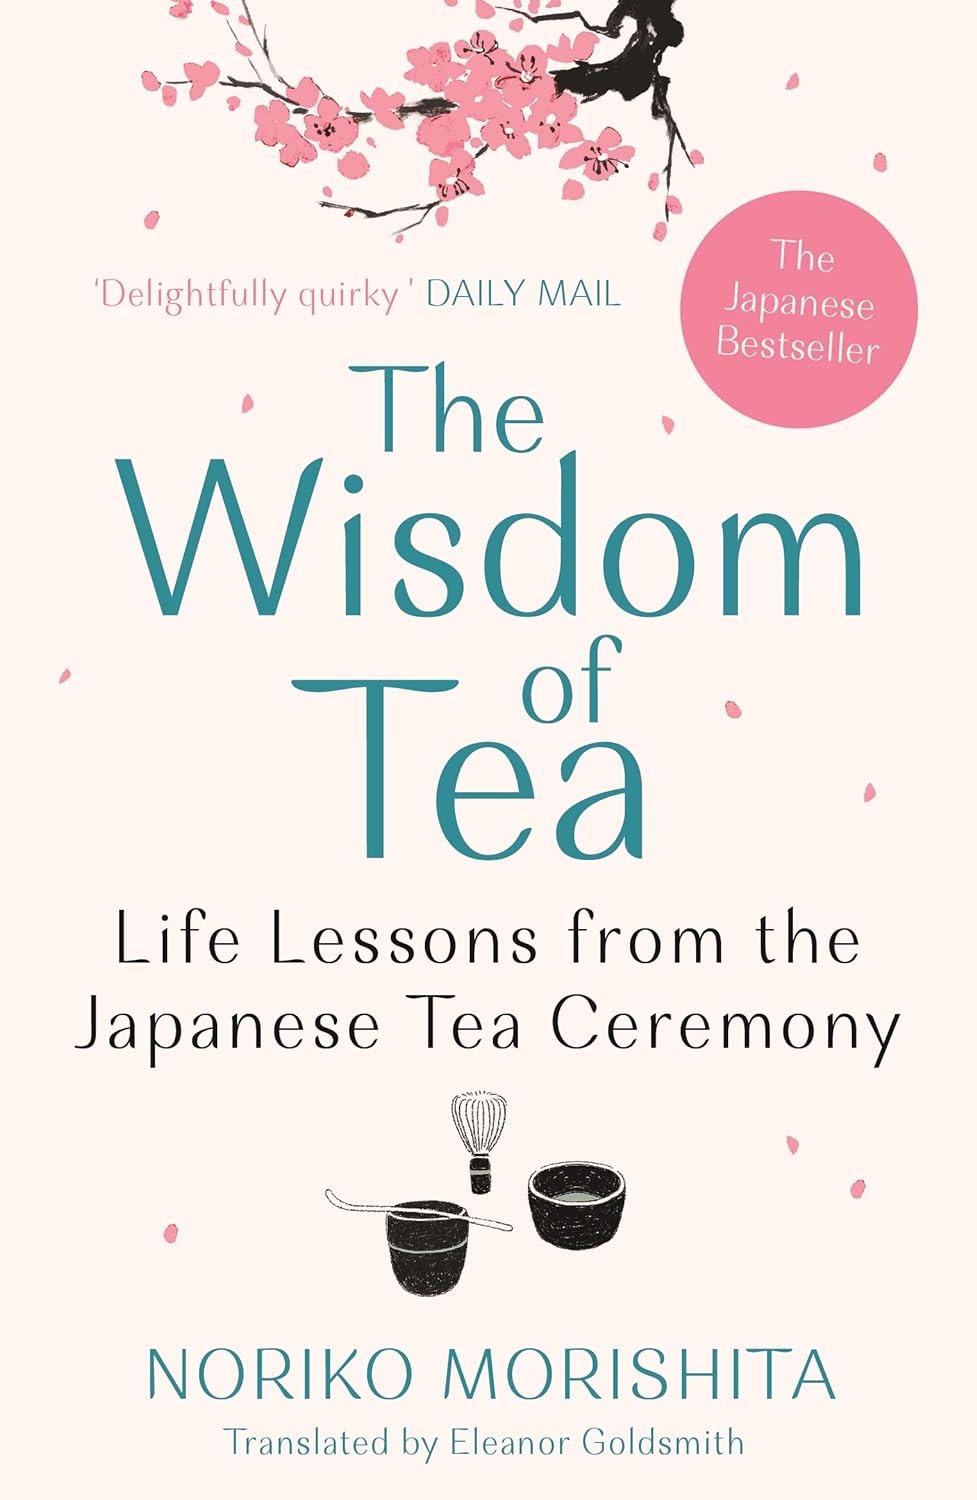 The front cover of The Wisdom of Tea. The background is a pale pink, with a few branches of Japanese cherry blossom at the top. Between the title and author is a black and white illustration of the components involved in making tea.